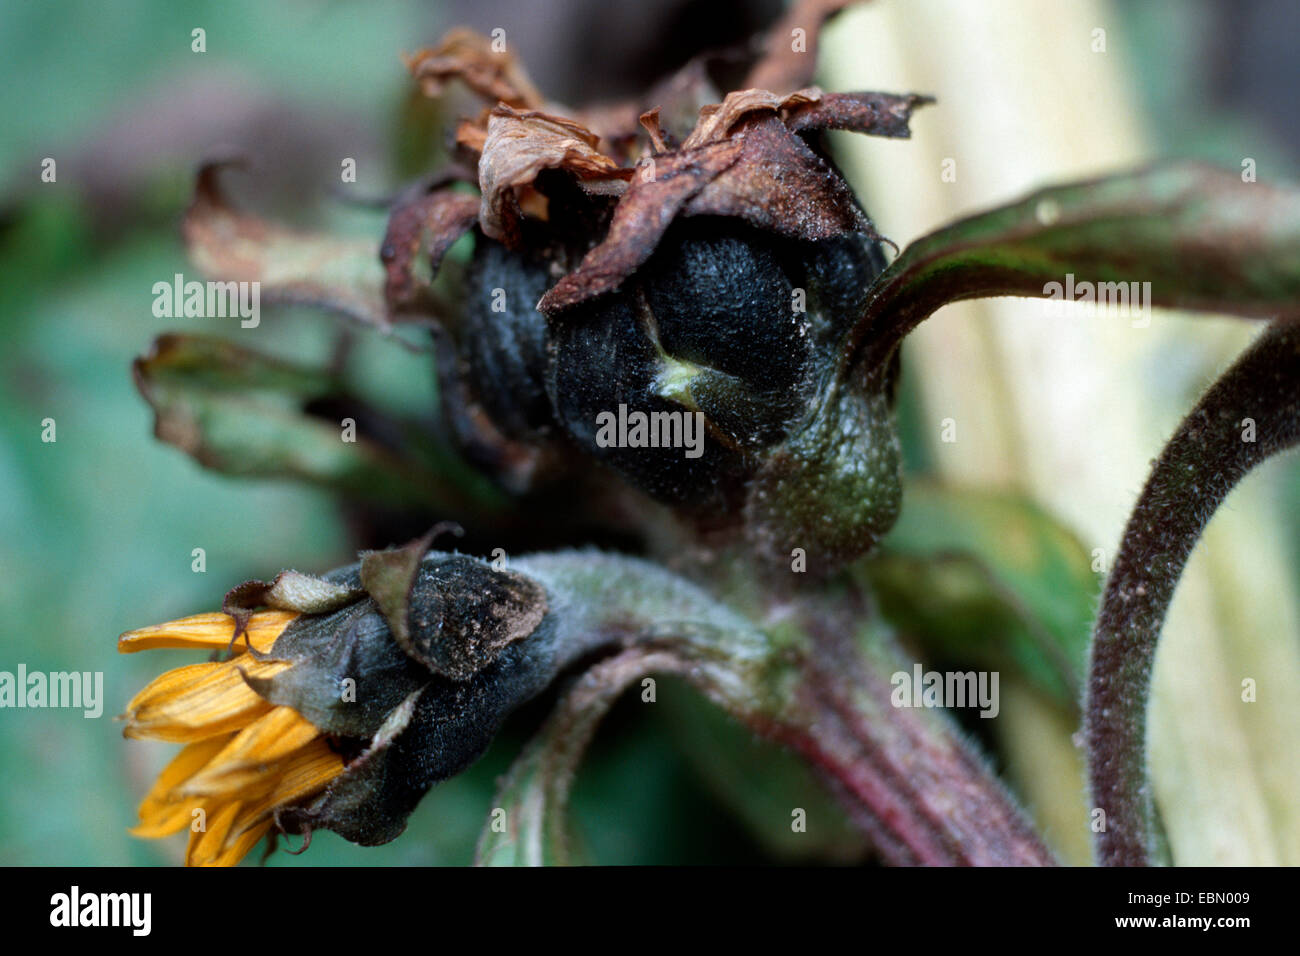 Botrytis cinerea (Botrytis cinerea, Botryotinia fuckeliana), young phase on sunflower, Helianthus annuus Stock Photo